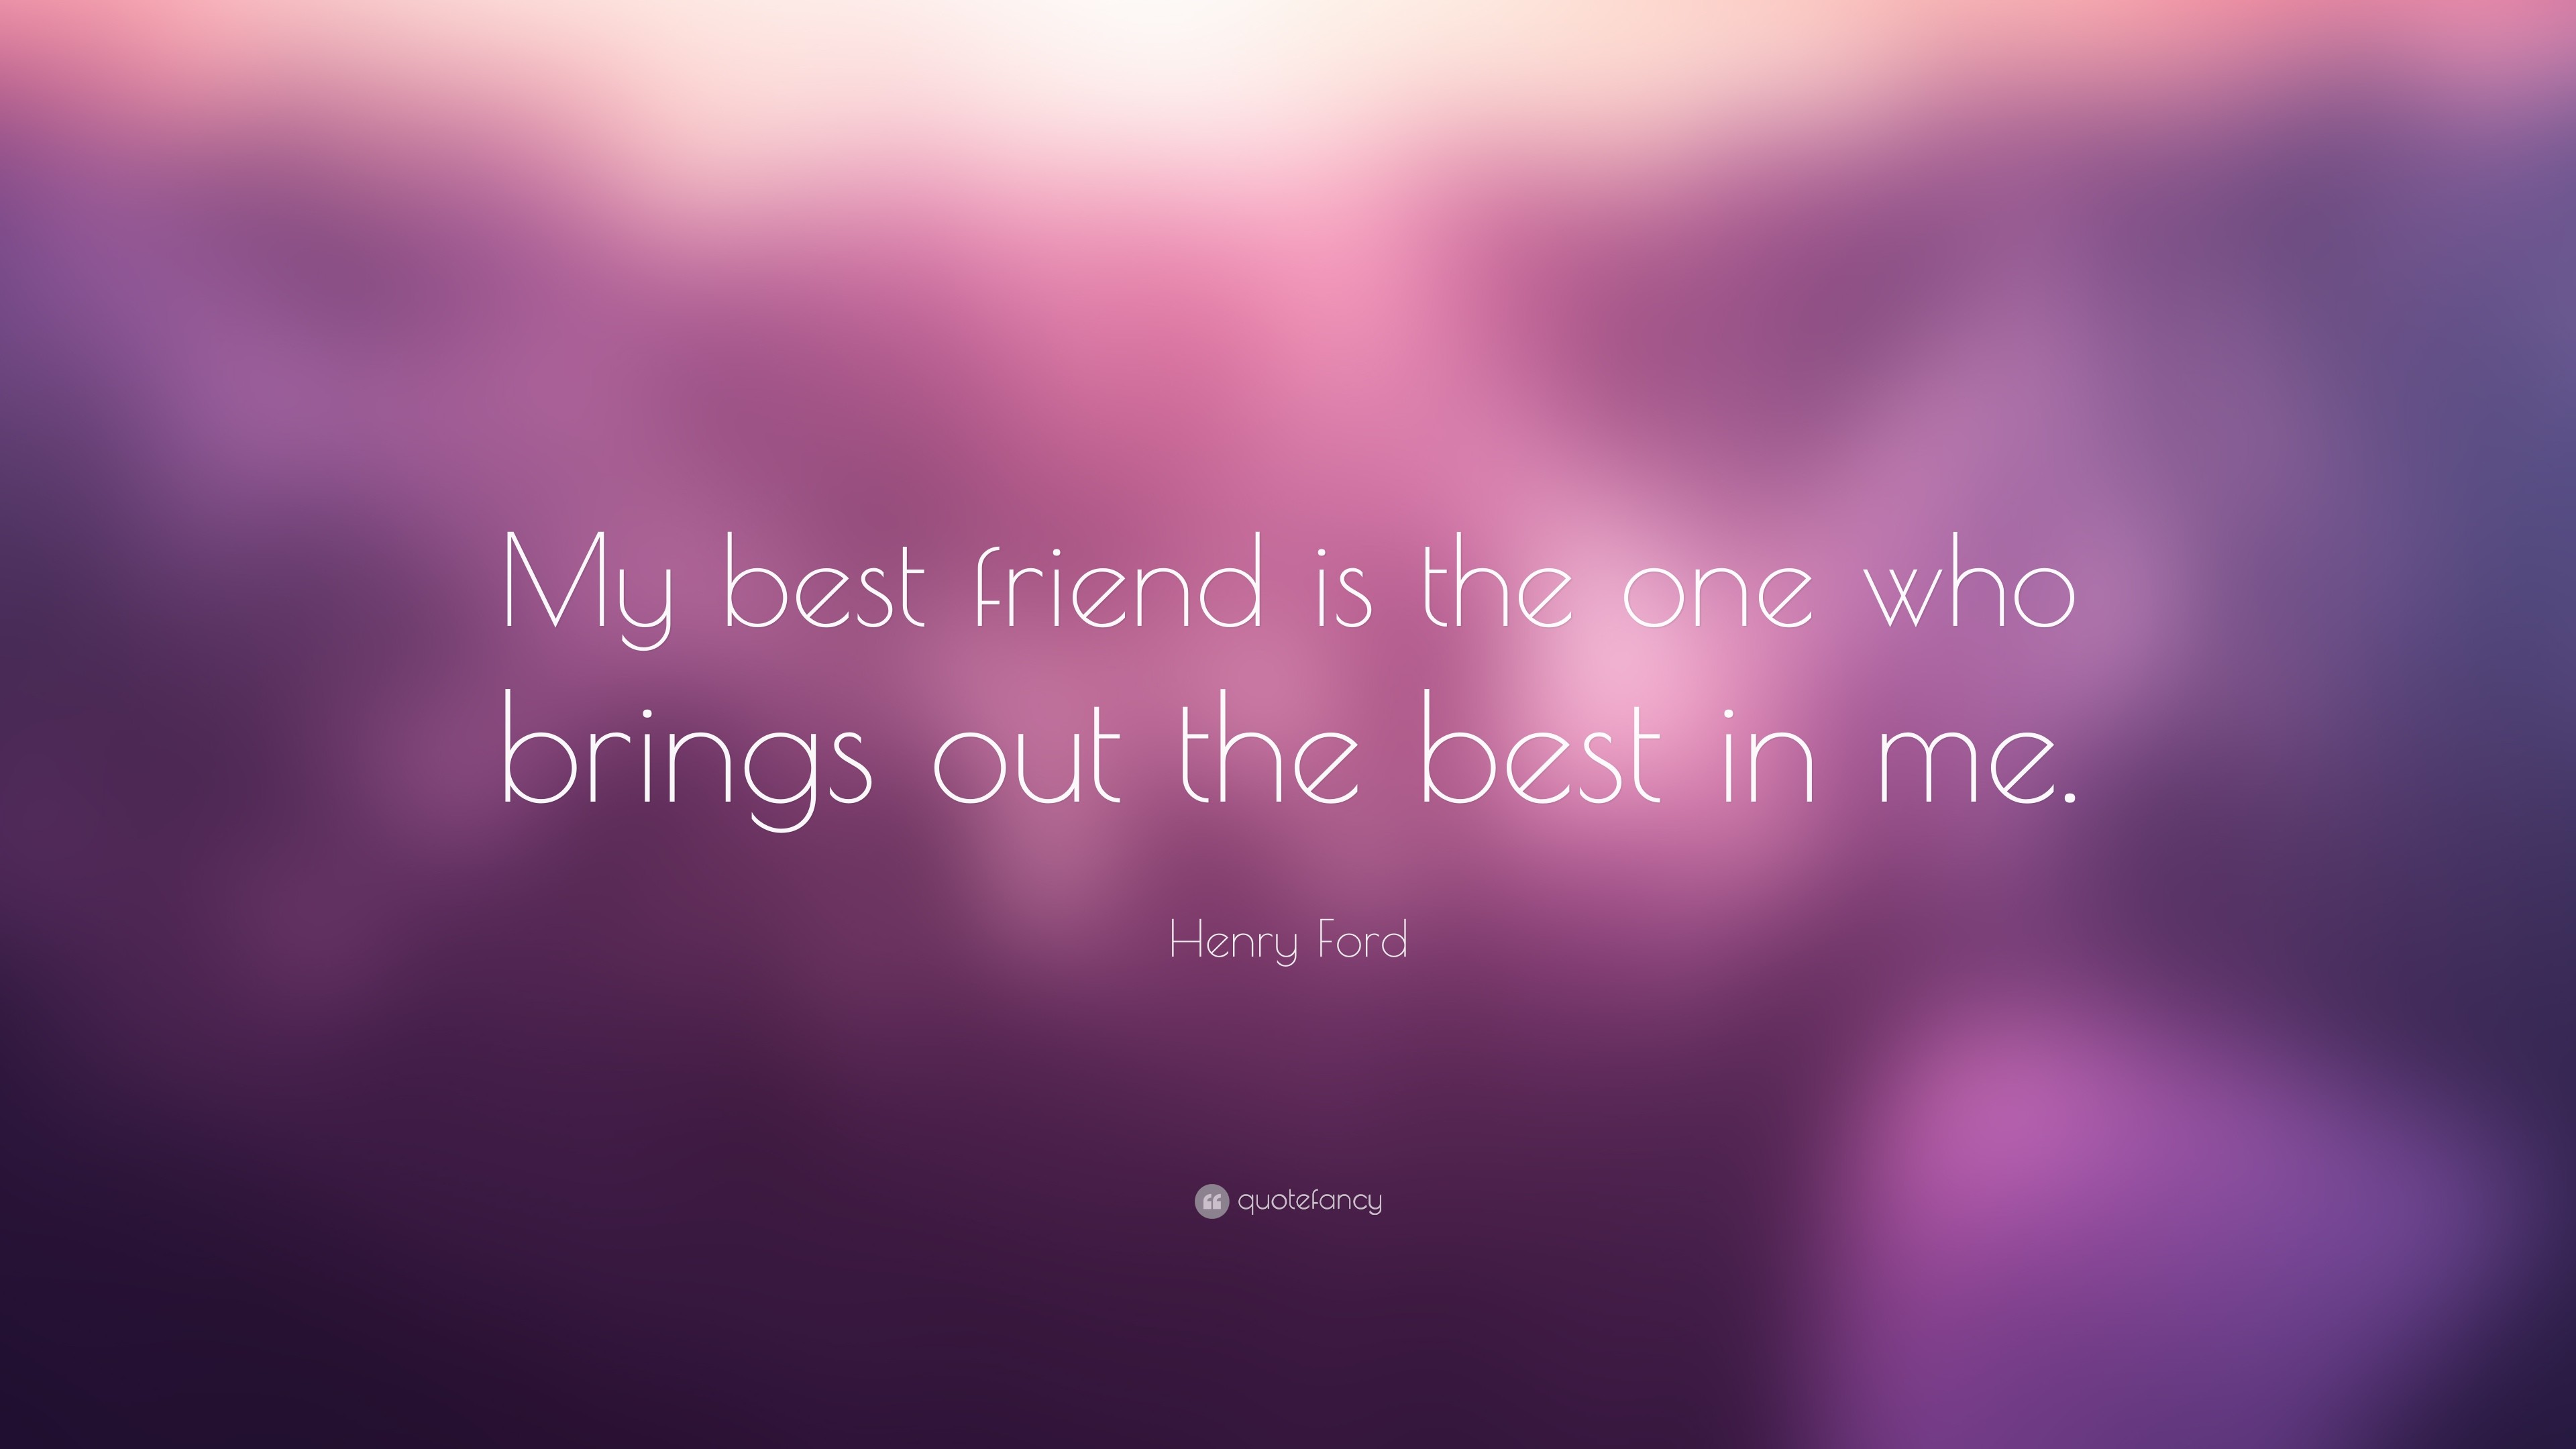 3840x2160 Free HD Best Friend Wallpapers Images Download.